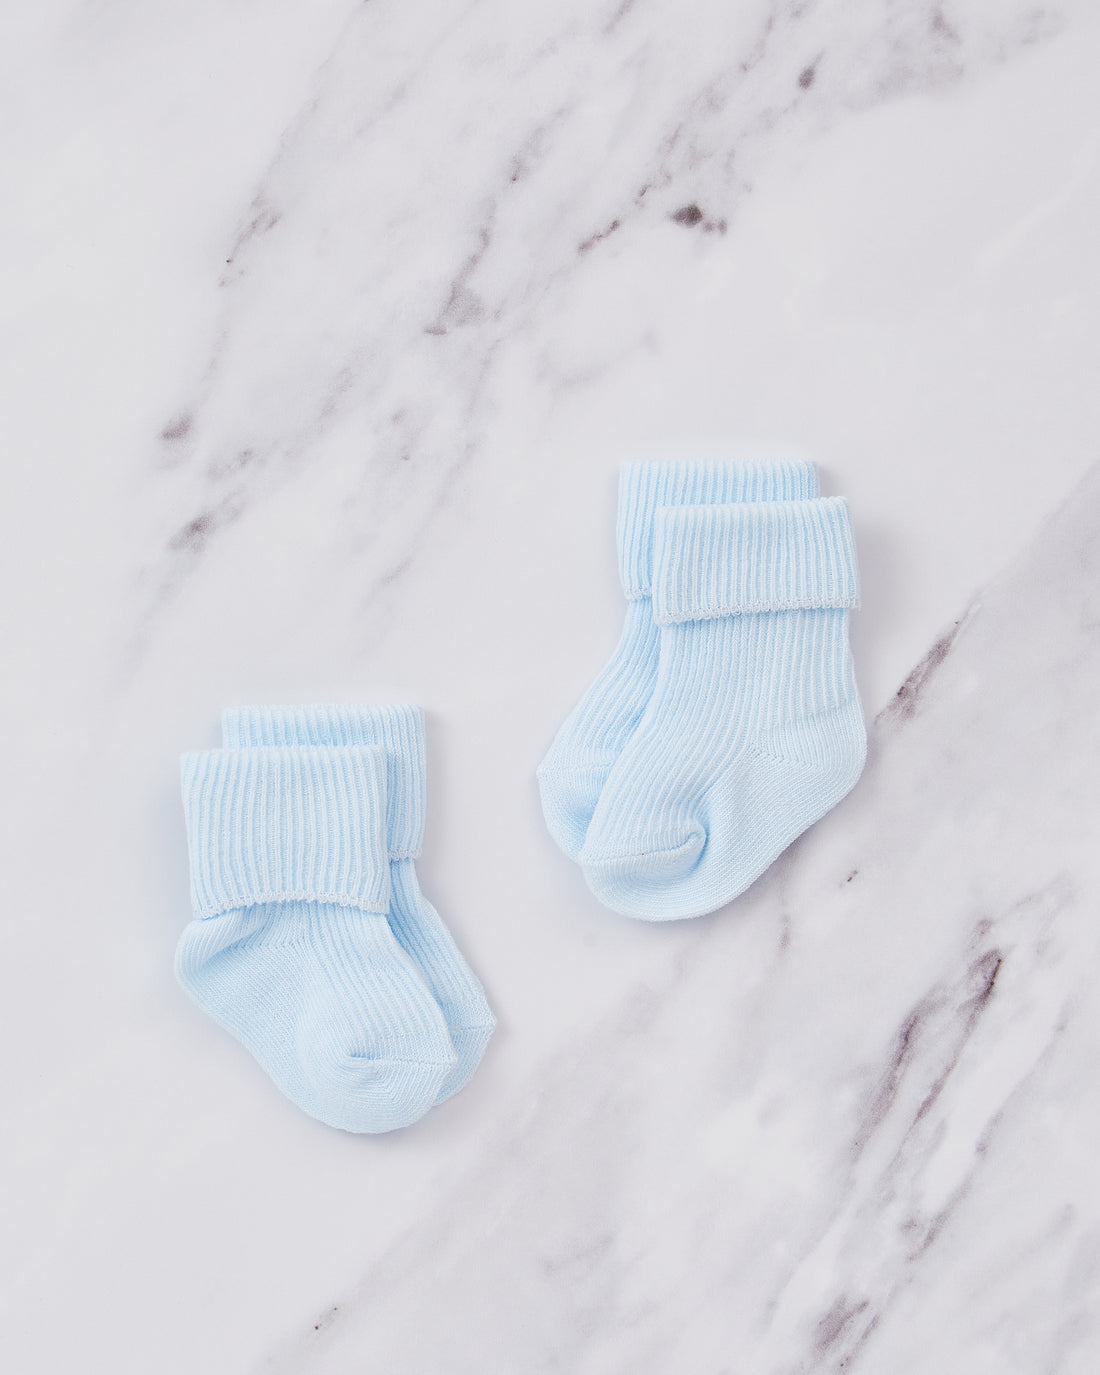 2 Pairs of turnover cotton baby socks, blue. 